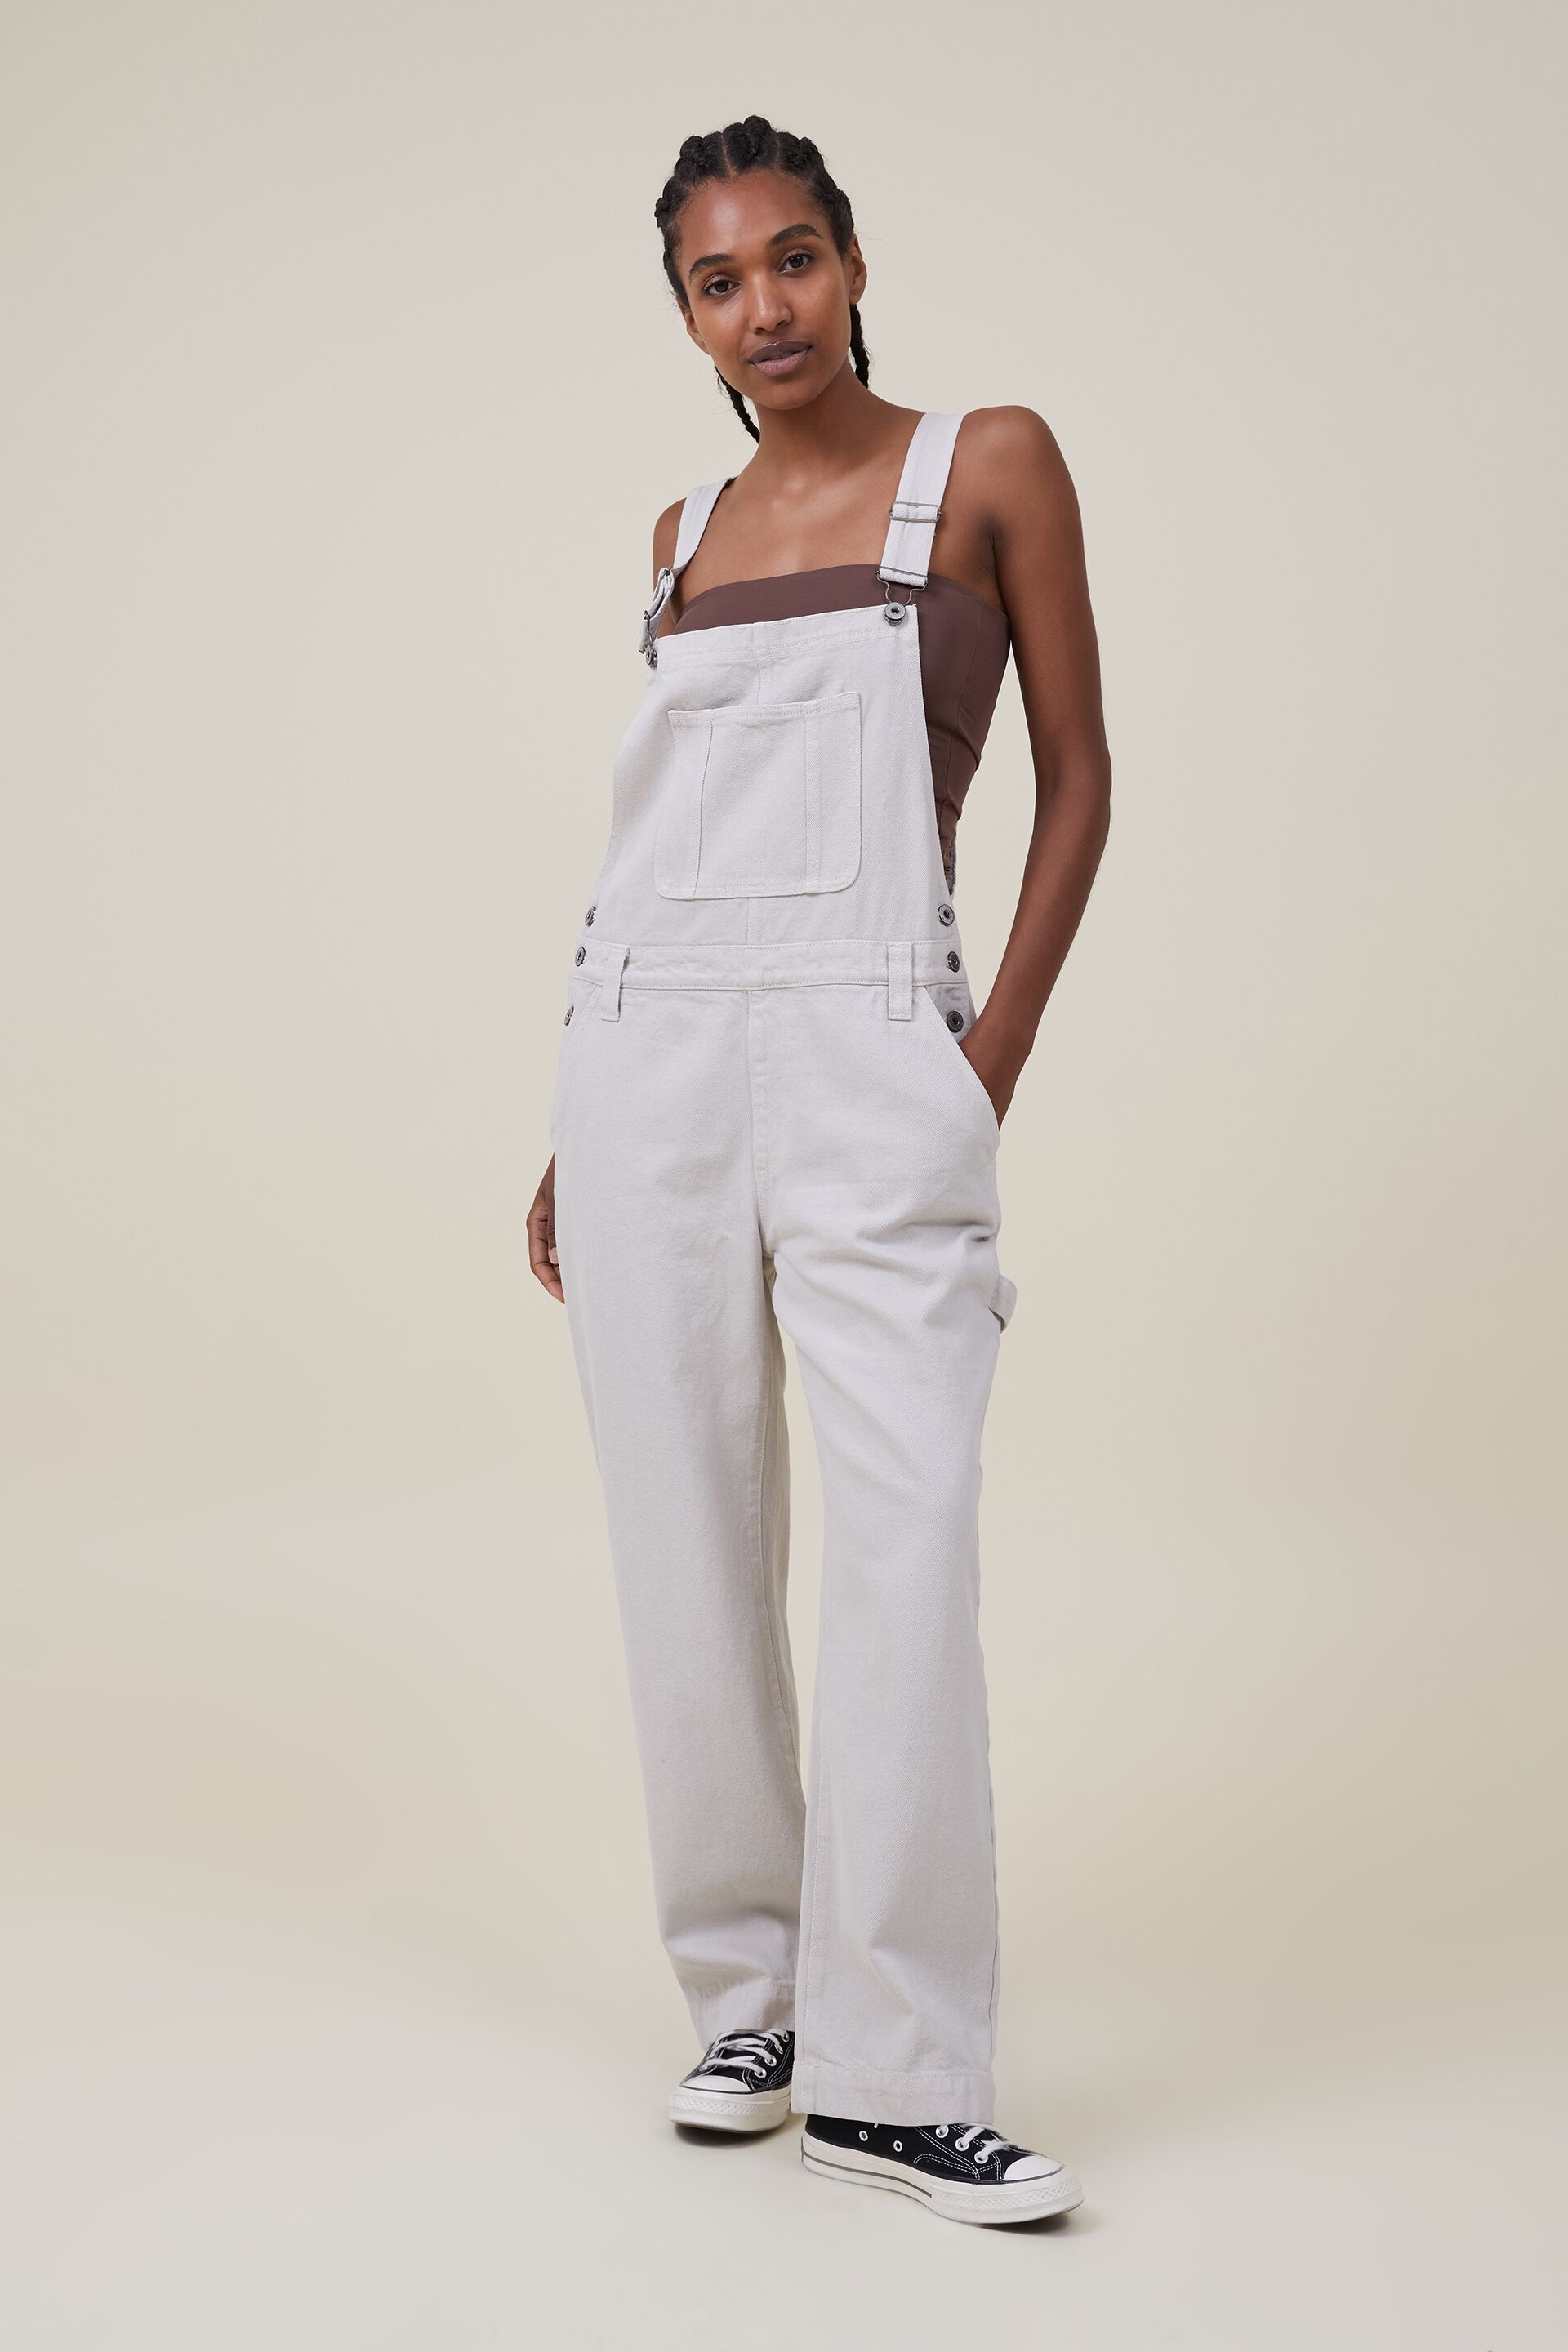 Petite Overalls|women's Sleeveless Denim Jumpsuit - Solid Strapless Romper  With Pockets